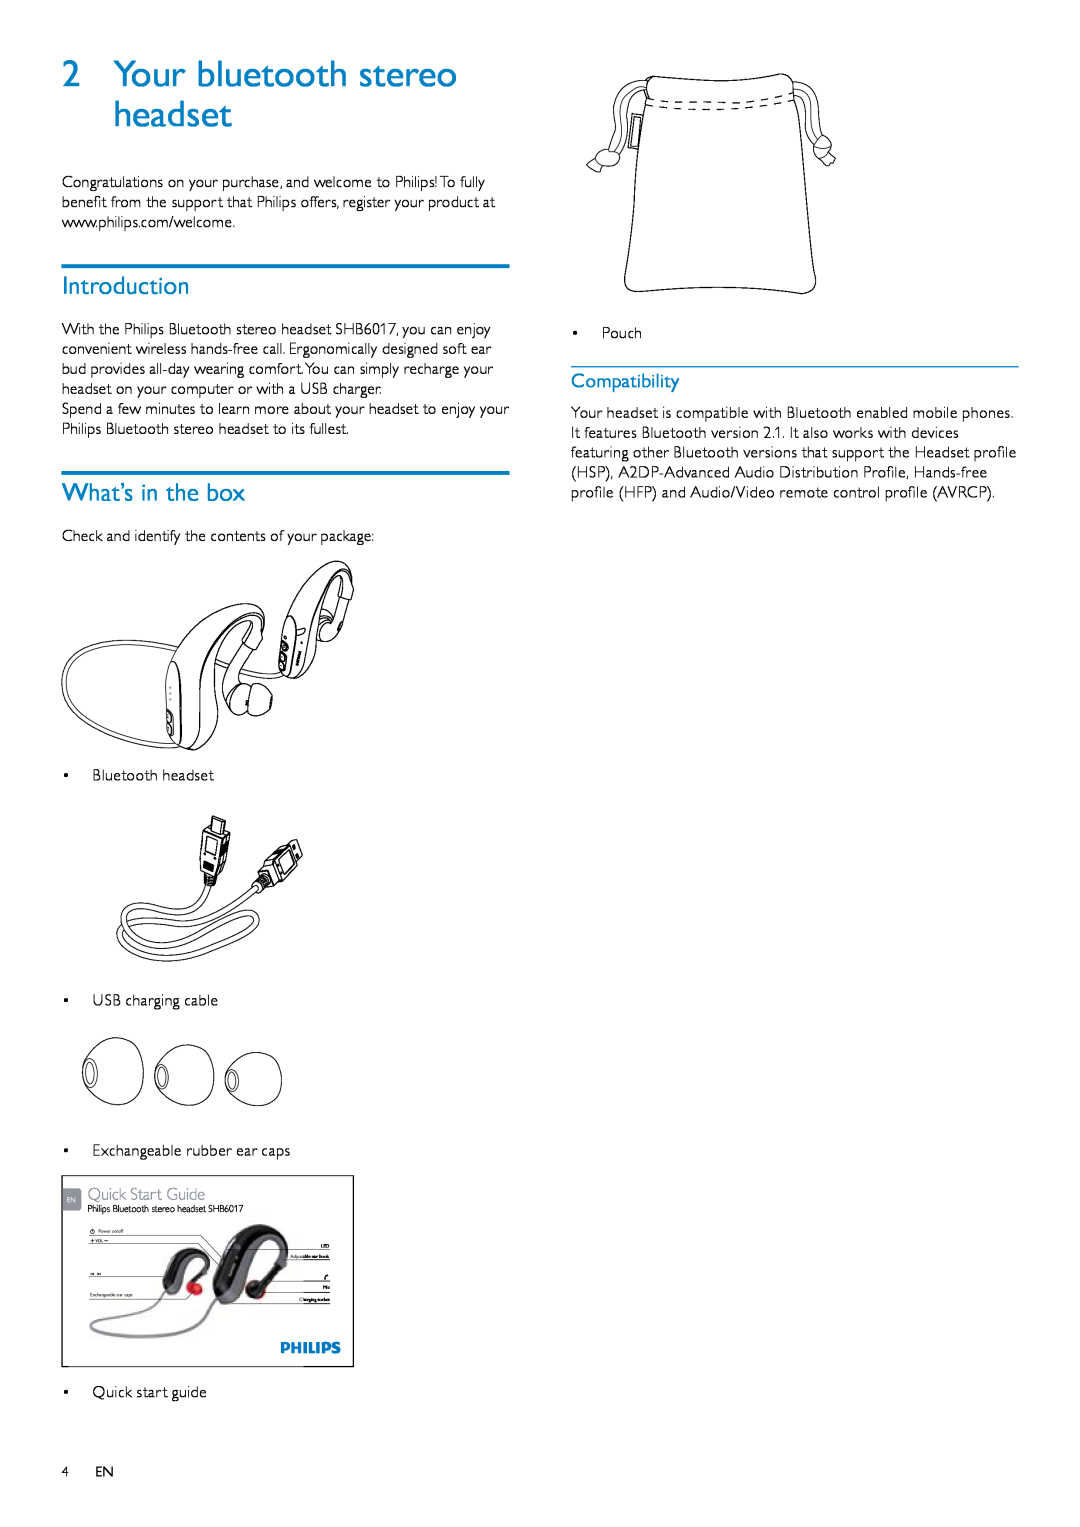 Philips SHB6017/28 Your bluetooth stereo headset, Introduction, What’s in the box, Compatibility, Quick Start Guide 